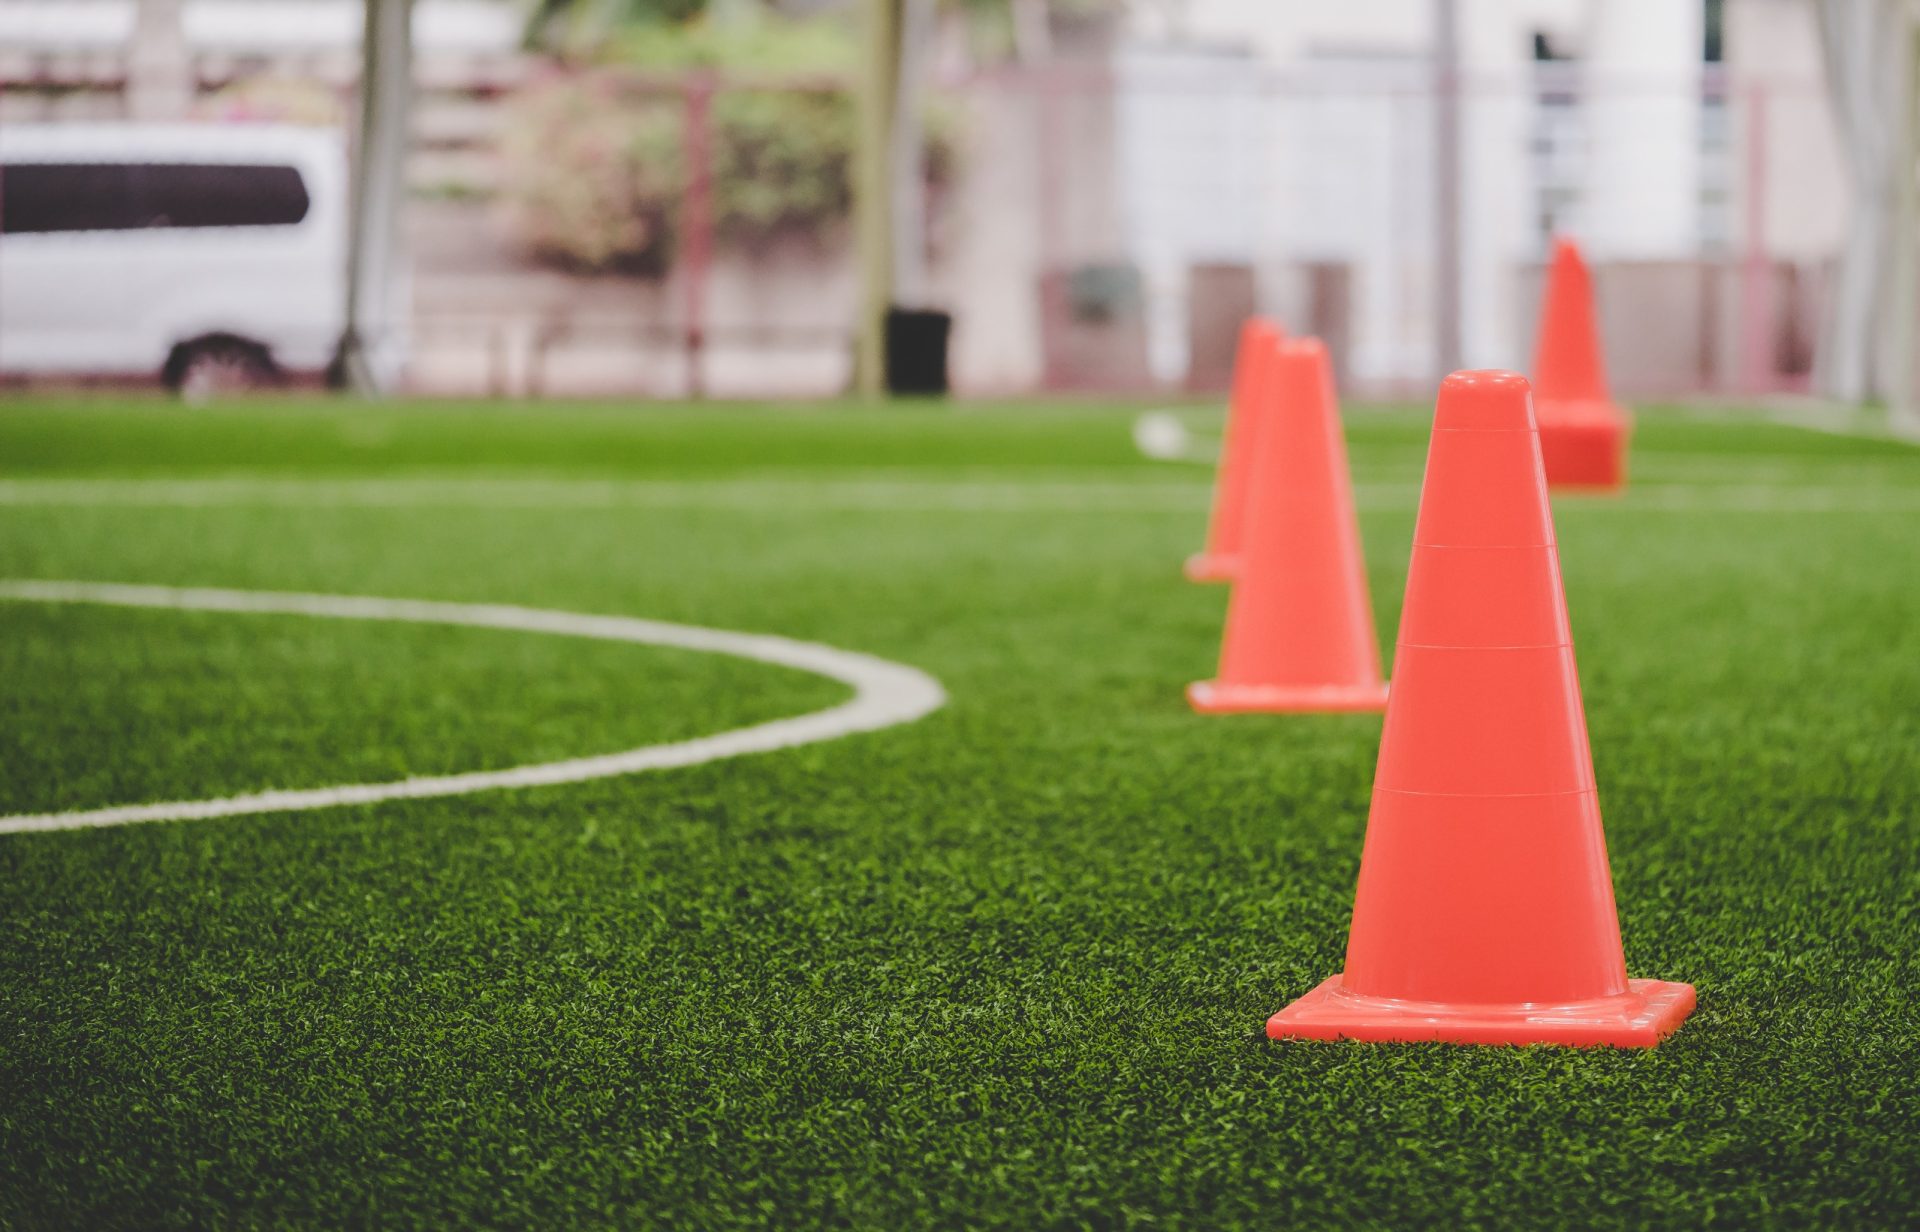 Suicides Exercise with Cones on Soccer Field